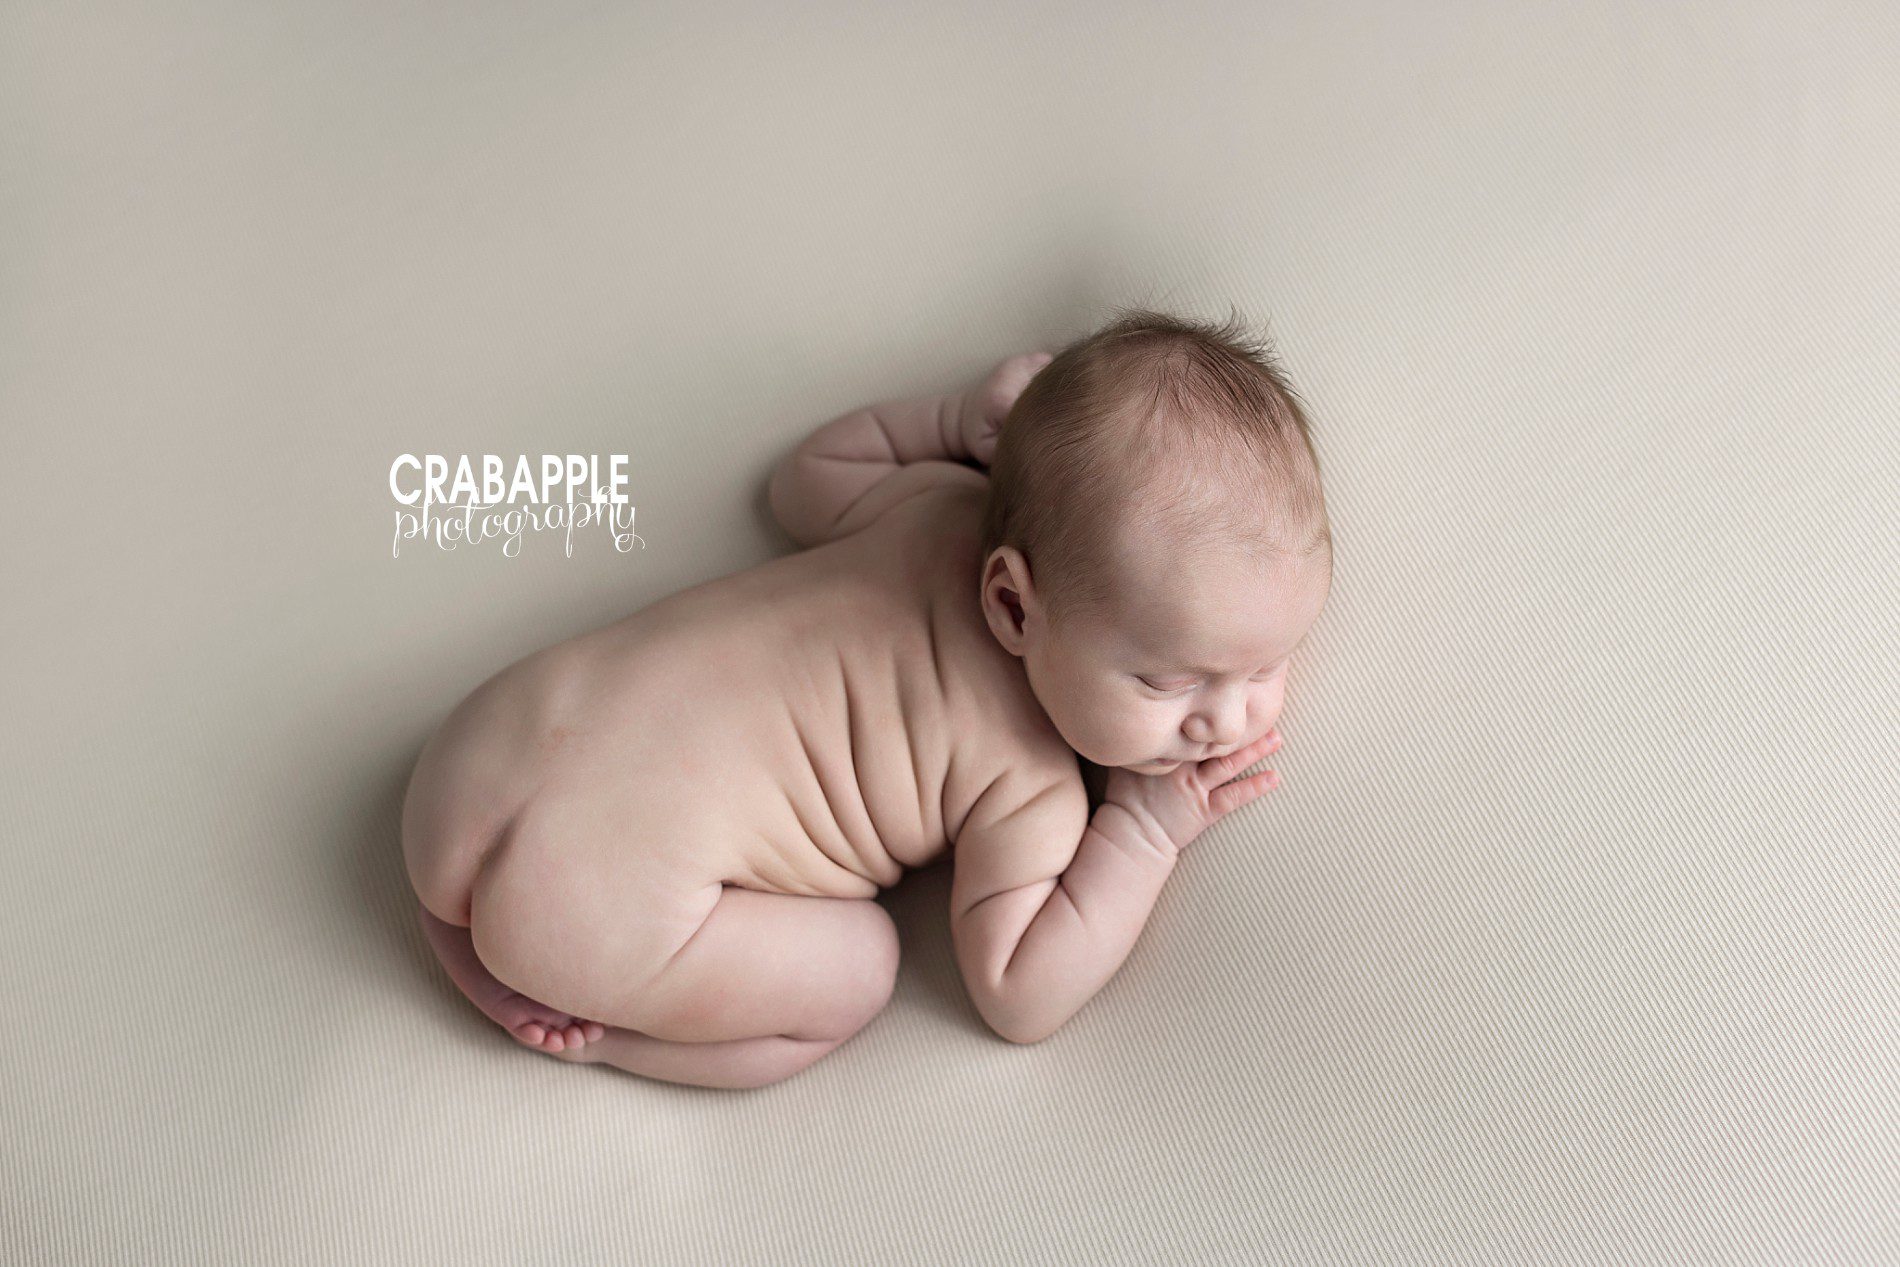 ideas for posing 5 week old infant for photos